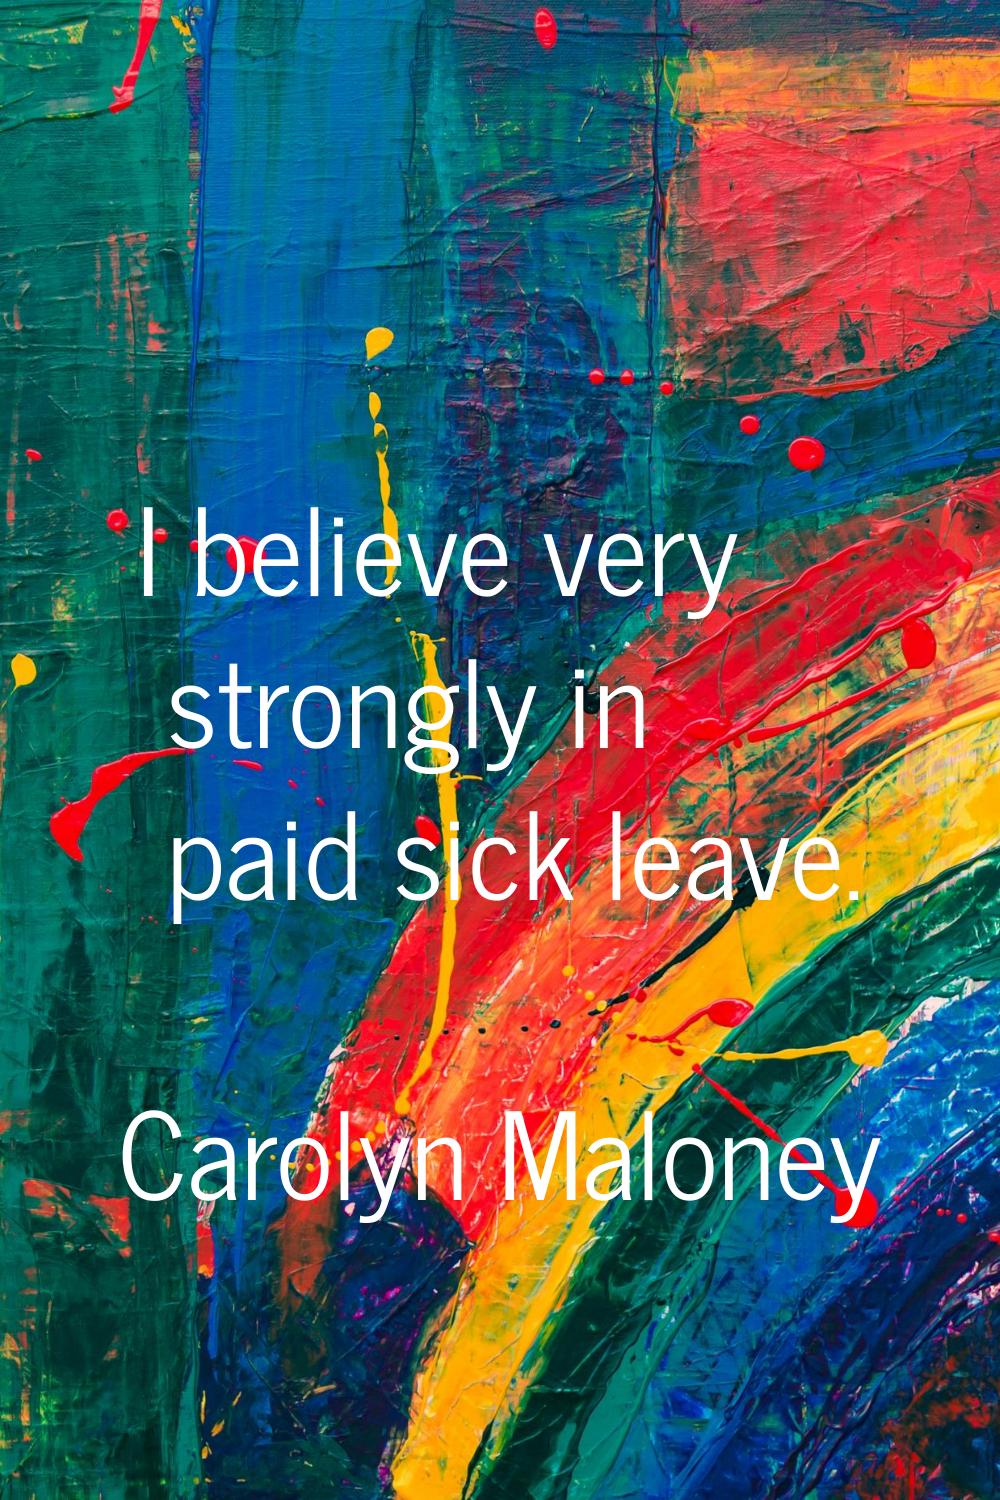 I believe very strongly in paid sick leave.